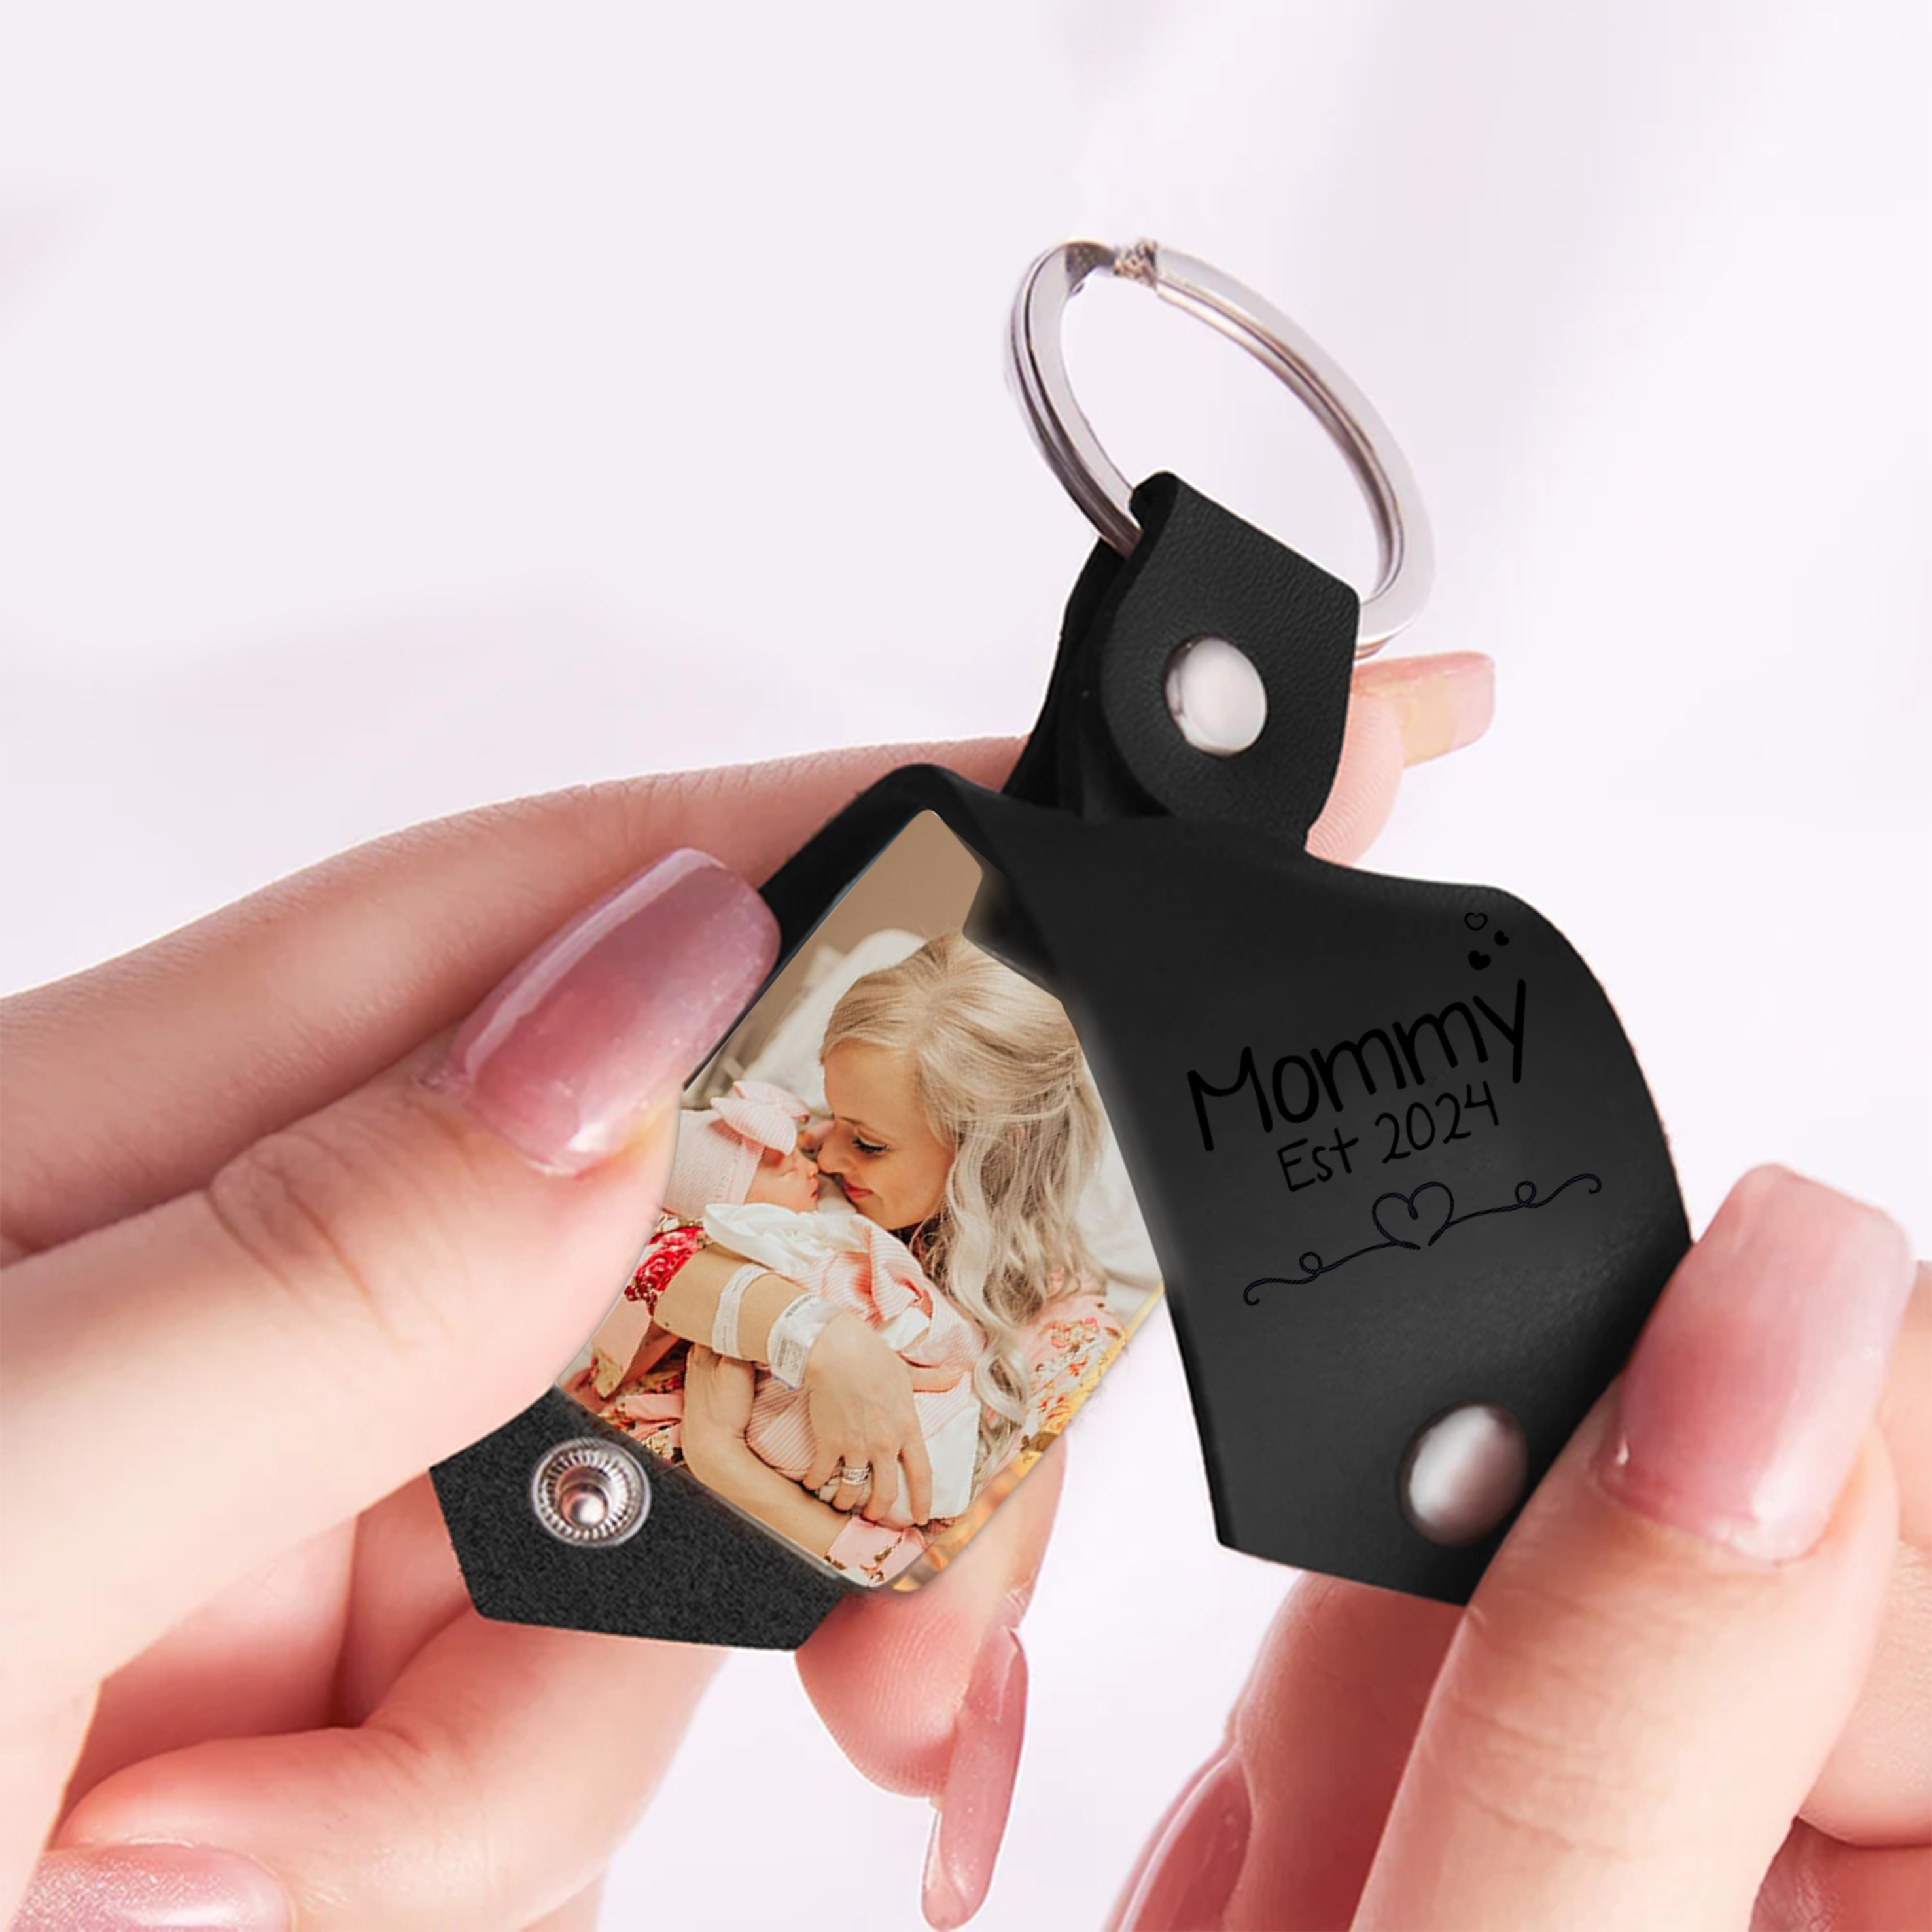 Mommy Est Photo Leather Keychain